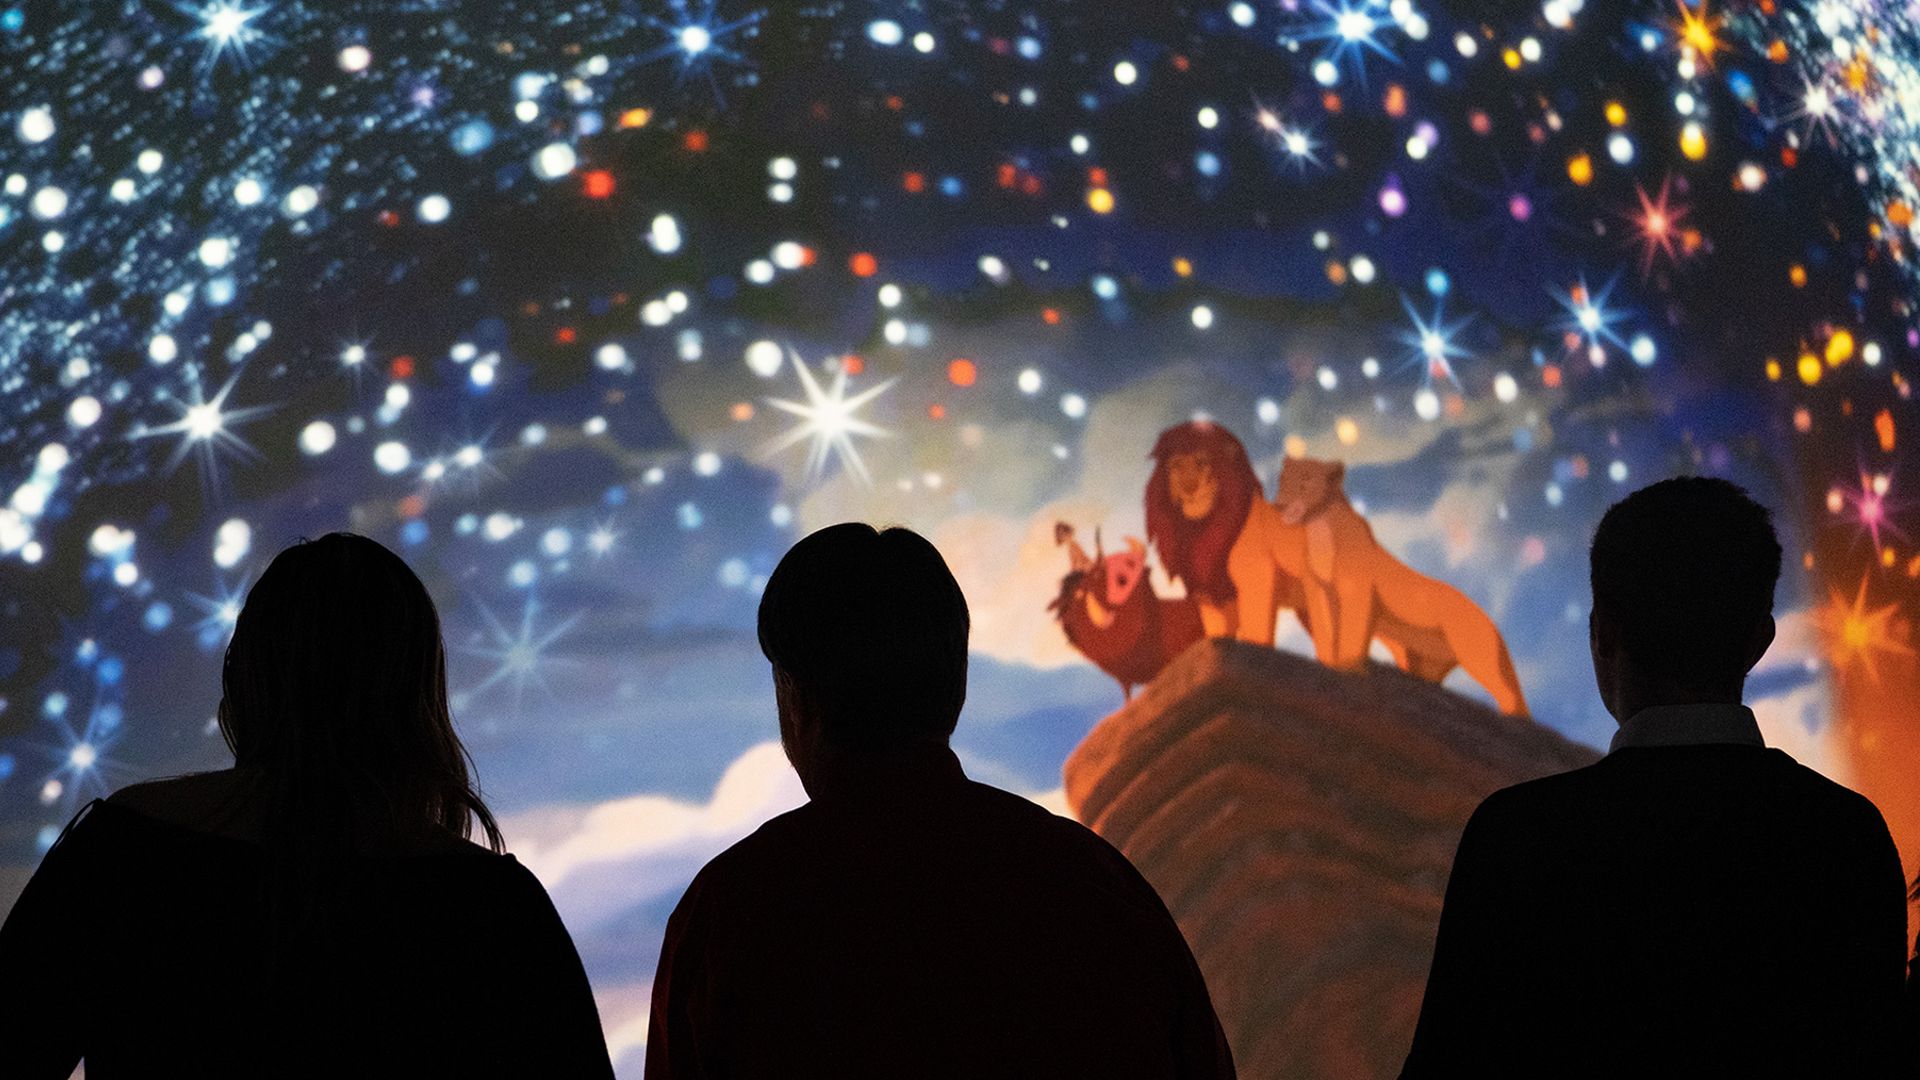 A projection at Disney's immersive experience. Photo: Courtesy of Lighthouse Immersive Studios